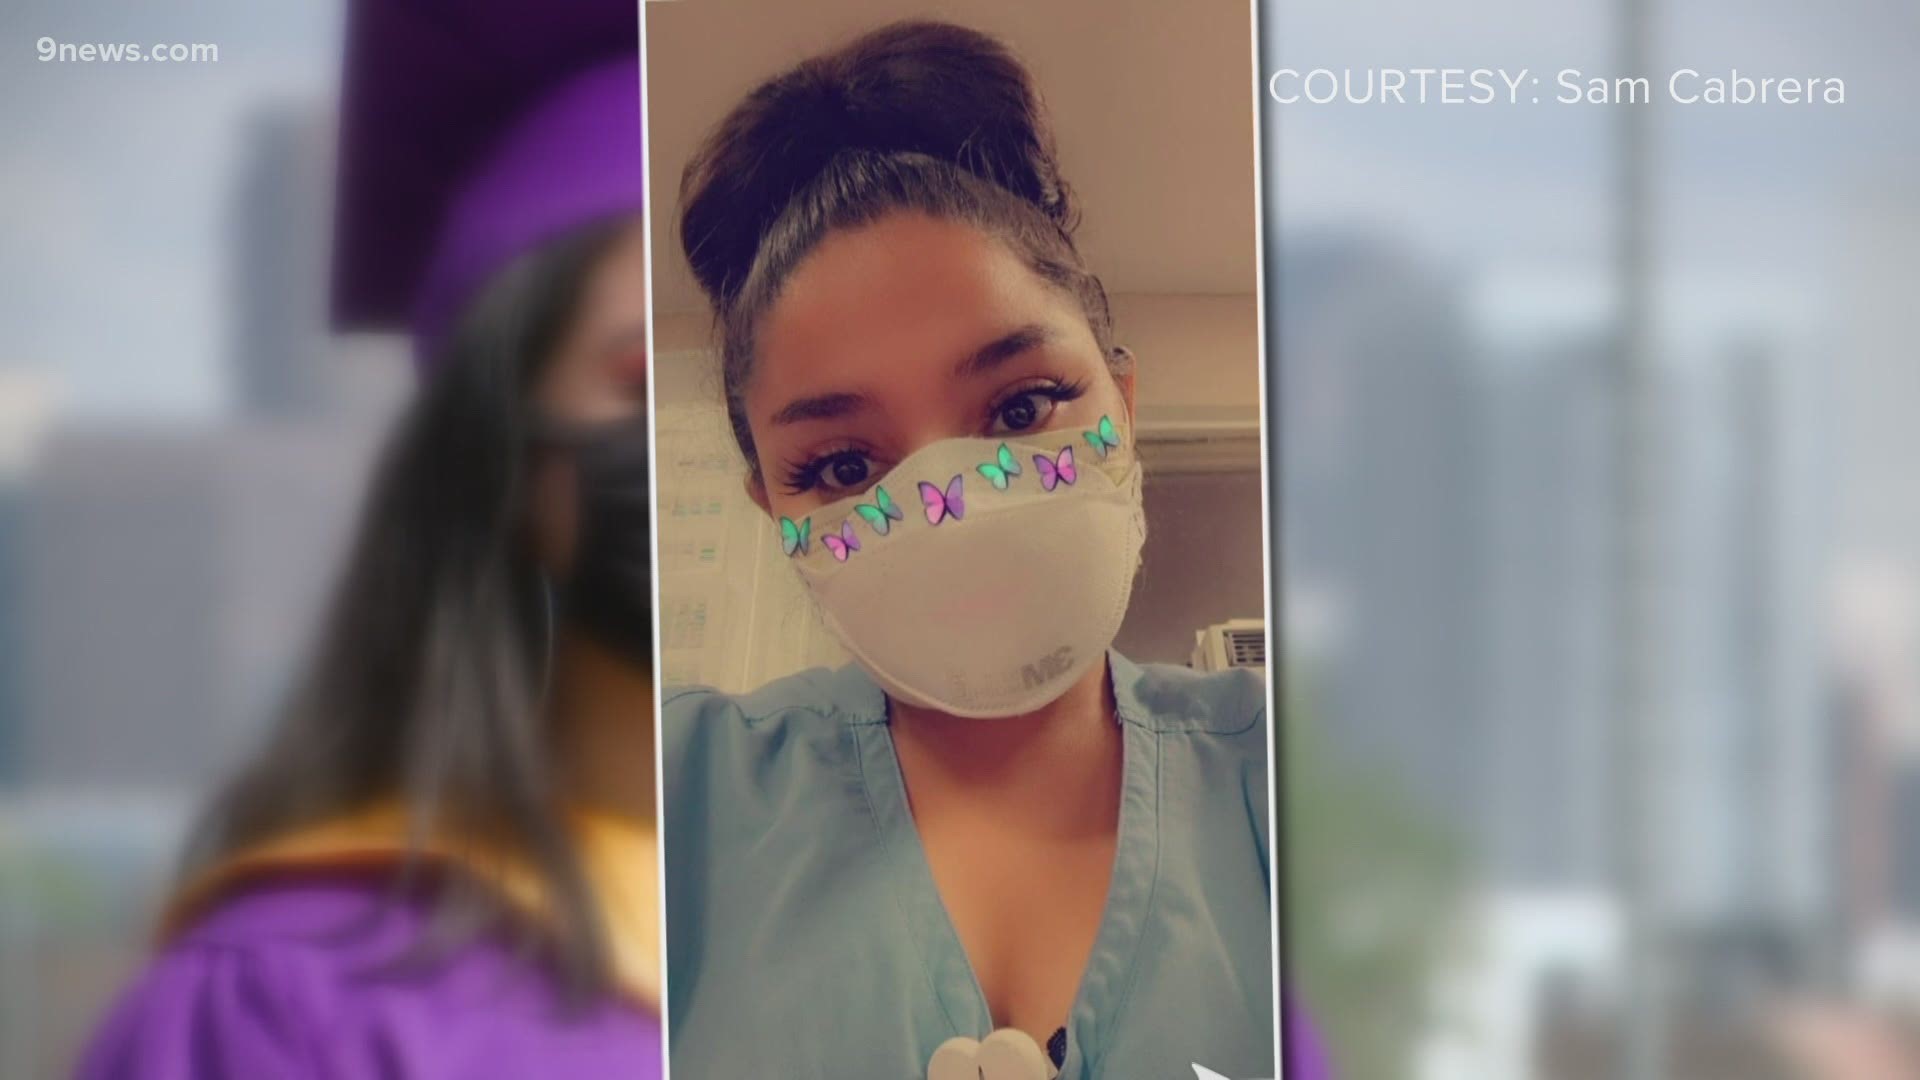 The Denver high school graduate is working at a nursing home during the coronavirus pandemic.